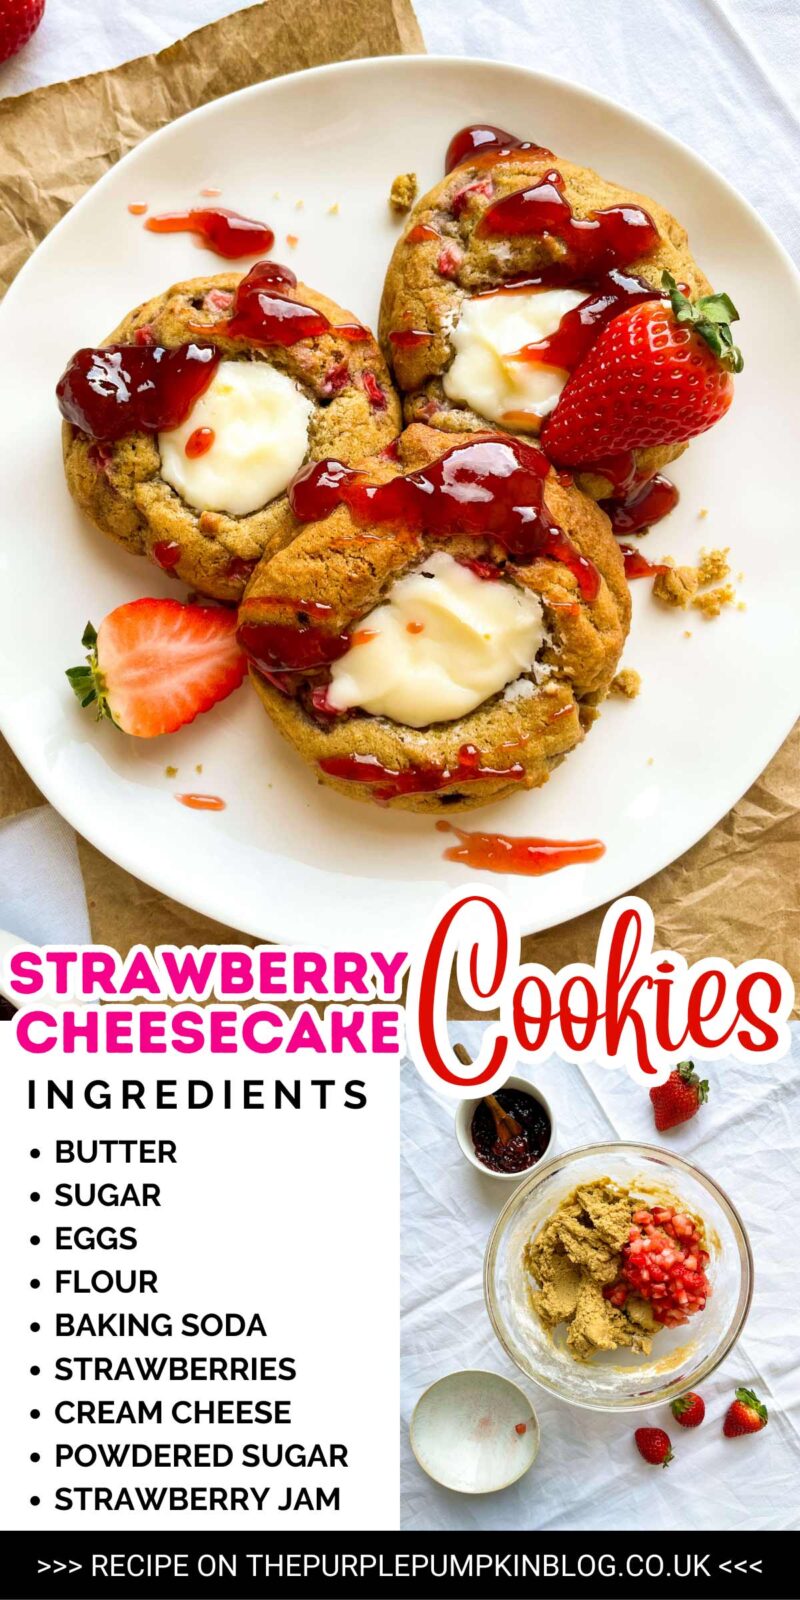 Ingredients Needed for Strawberry Cheesecake Cookies